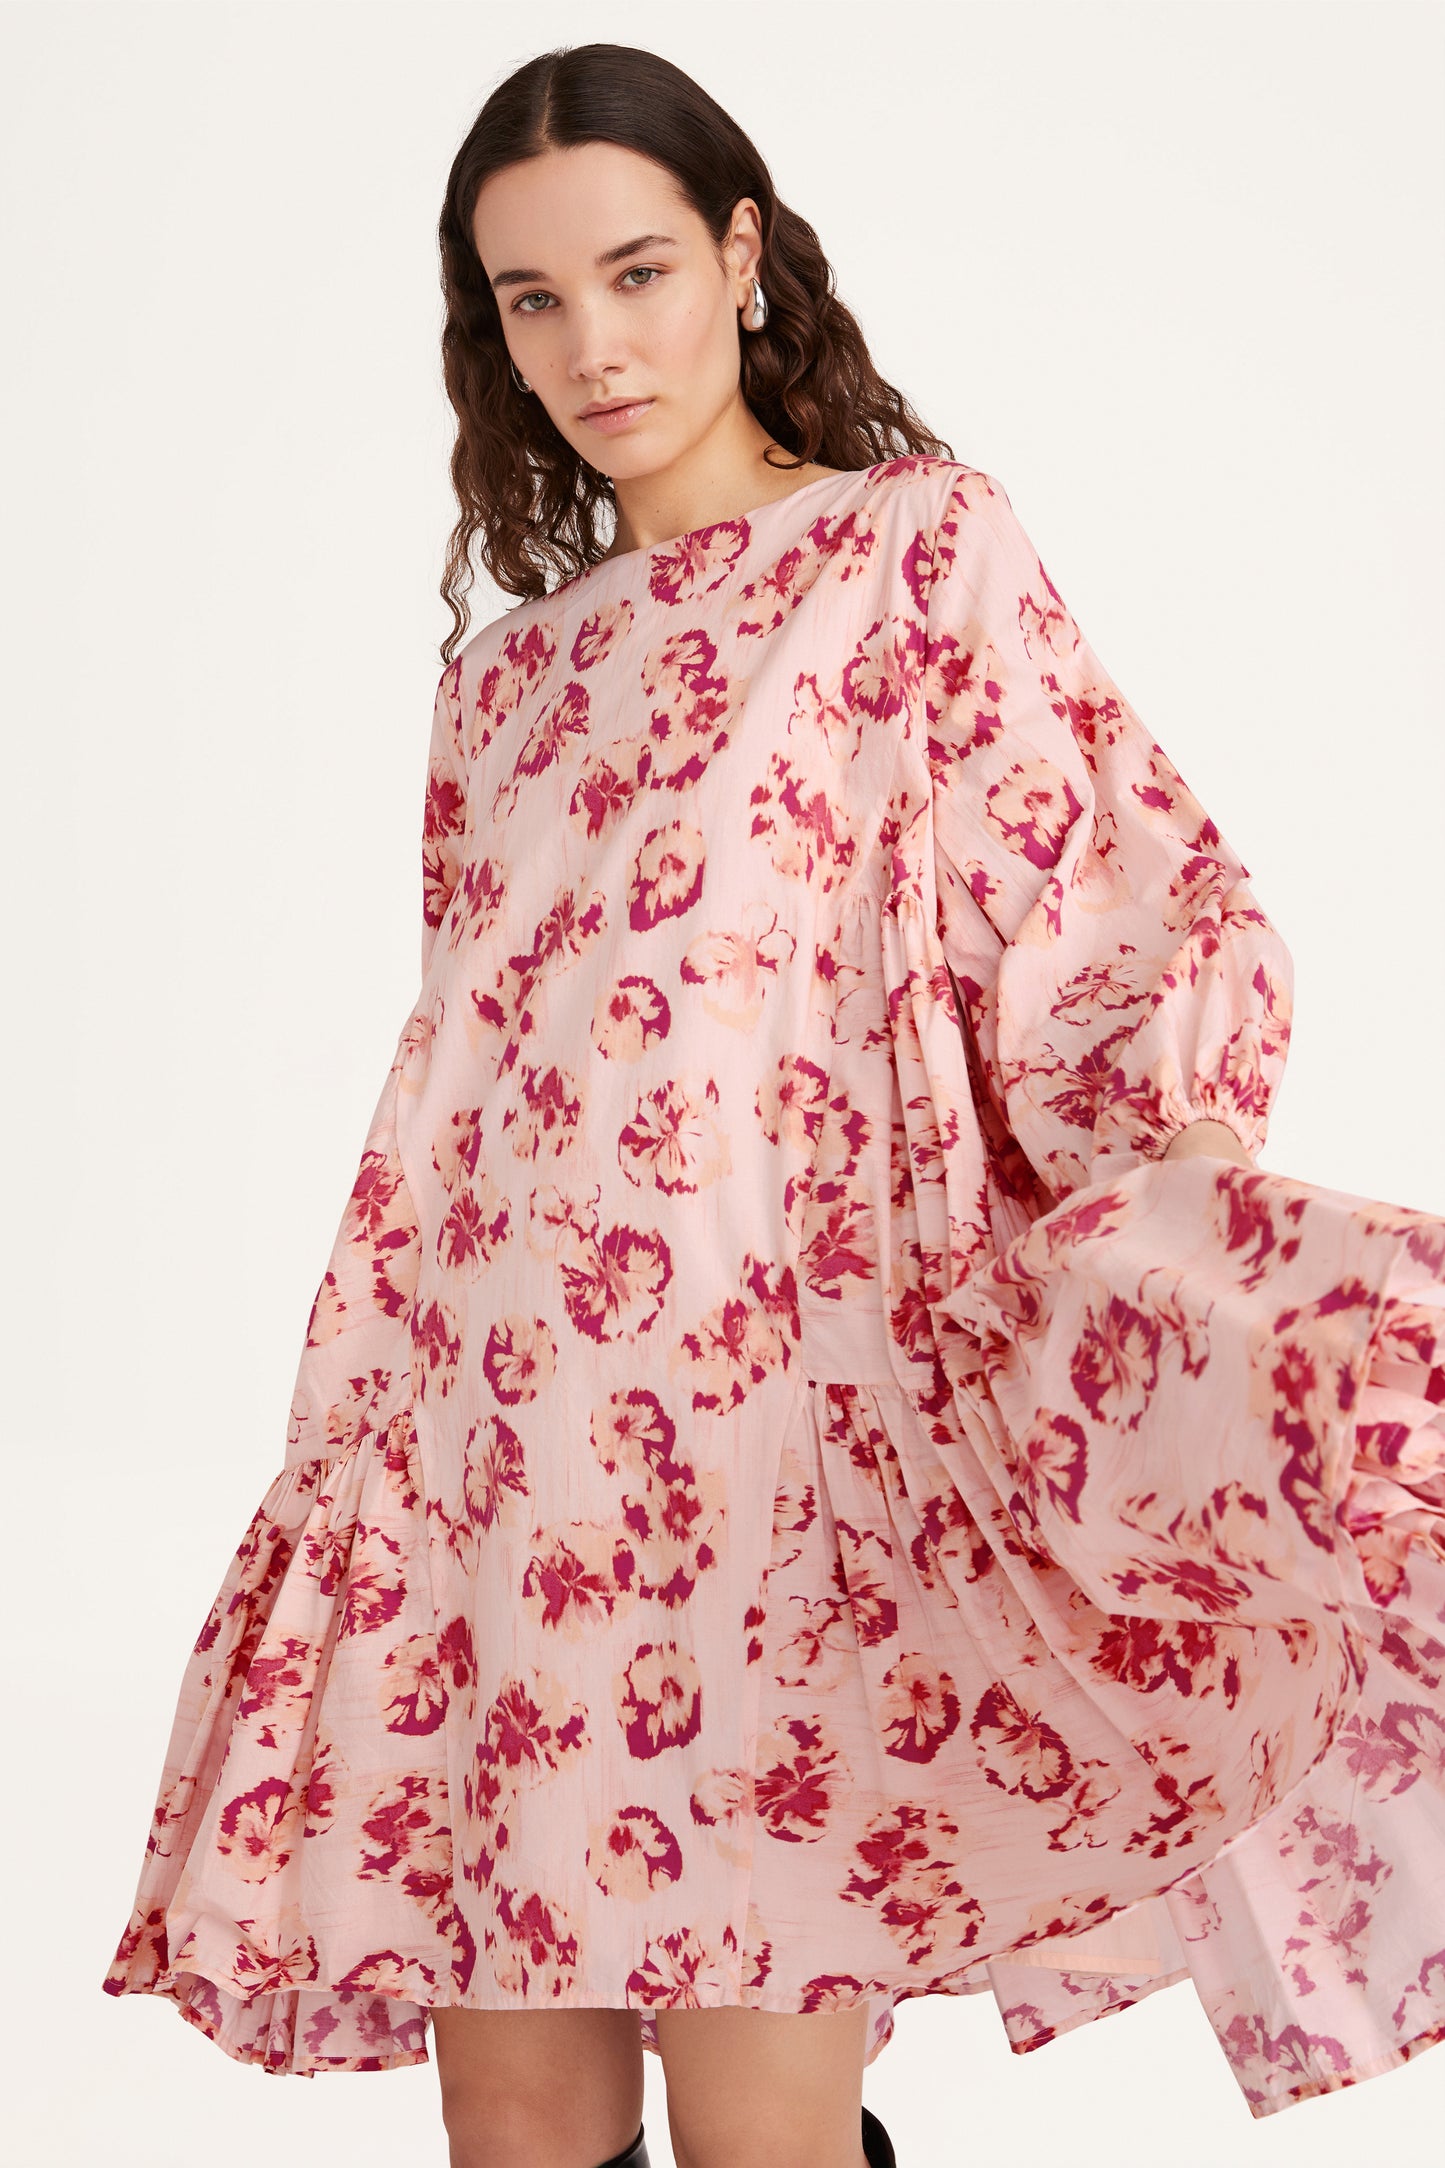 Byward Dress in Orchid Ikat Floral Print